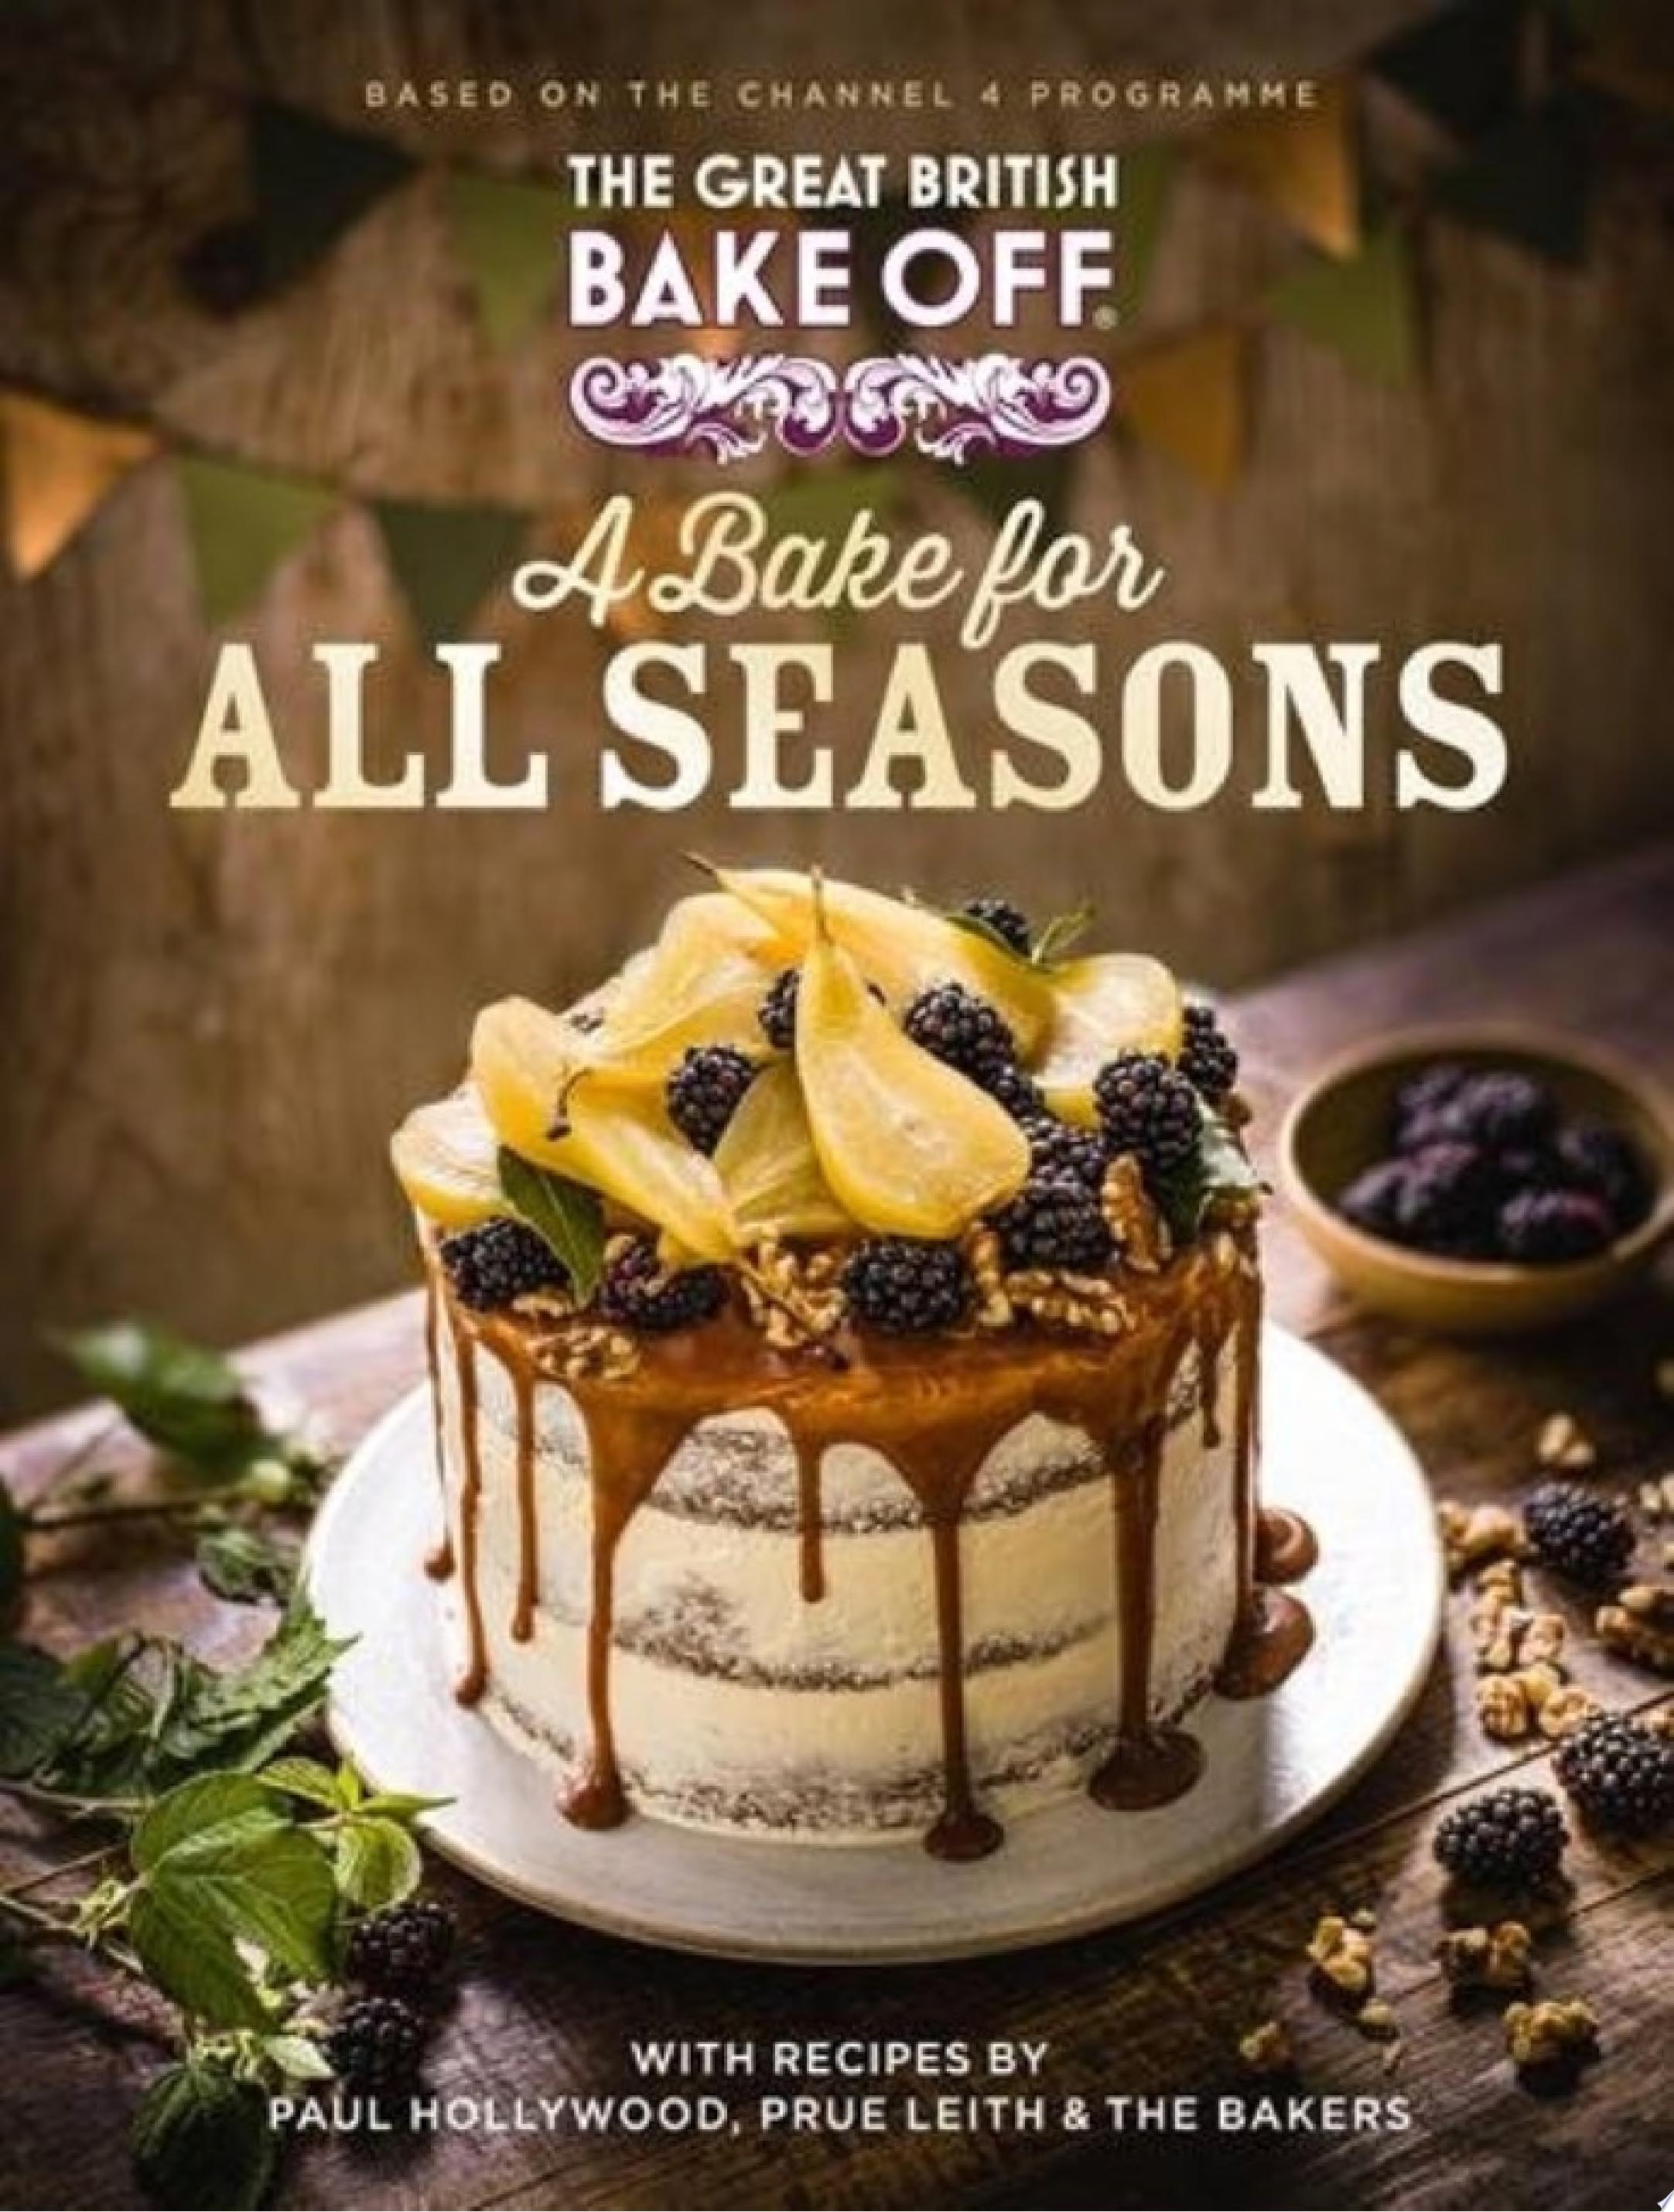 Image for "The Great British Bake Off: A Bake for all Seasons"